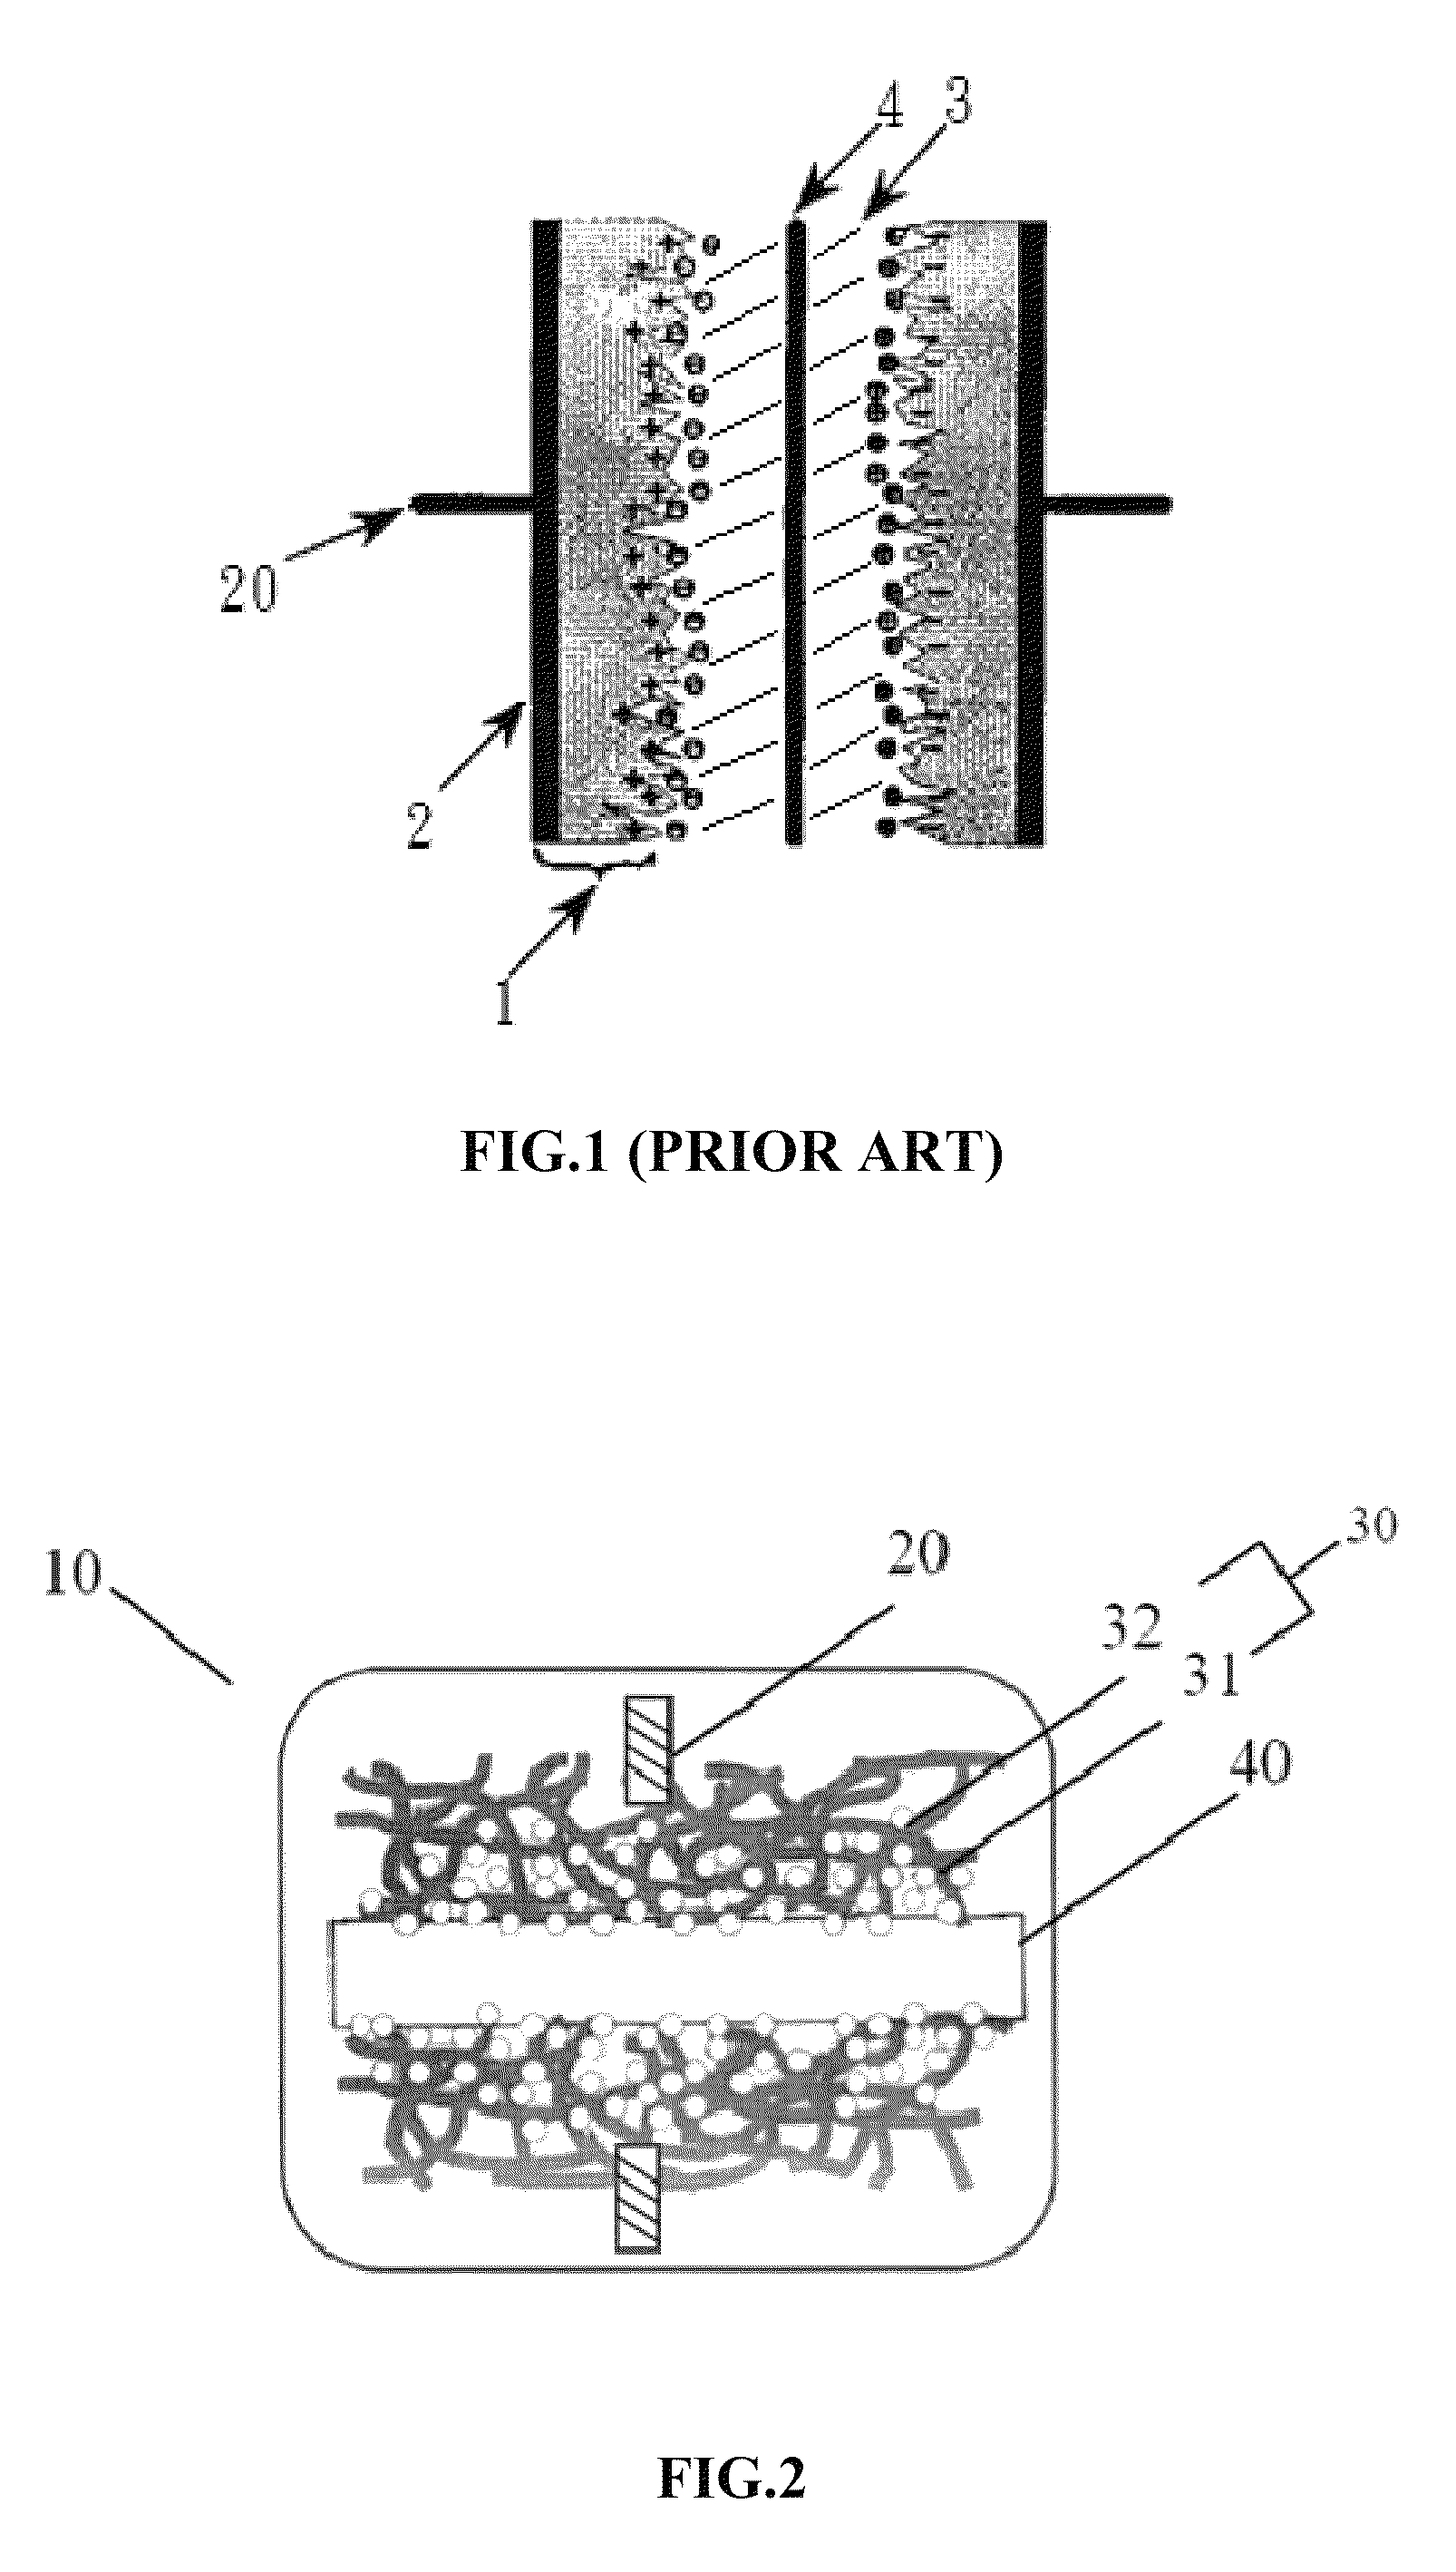 Super capacitor structure and the manufacture thereof